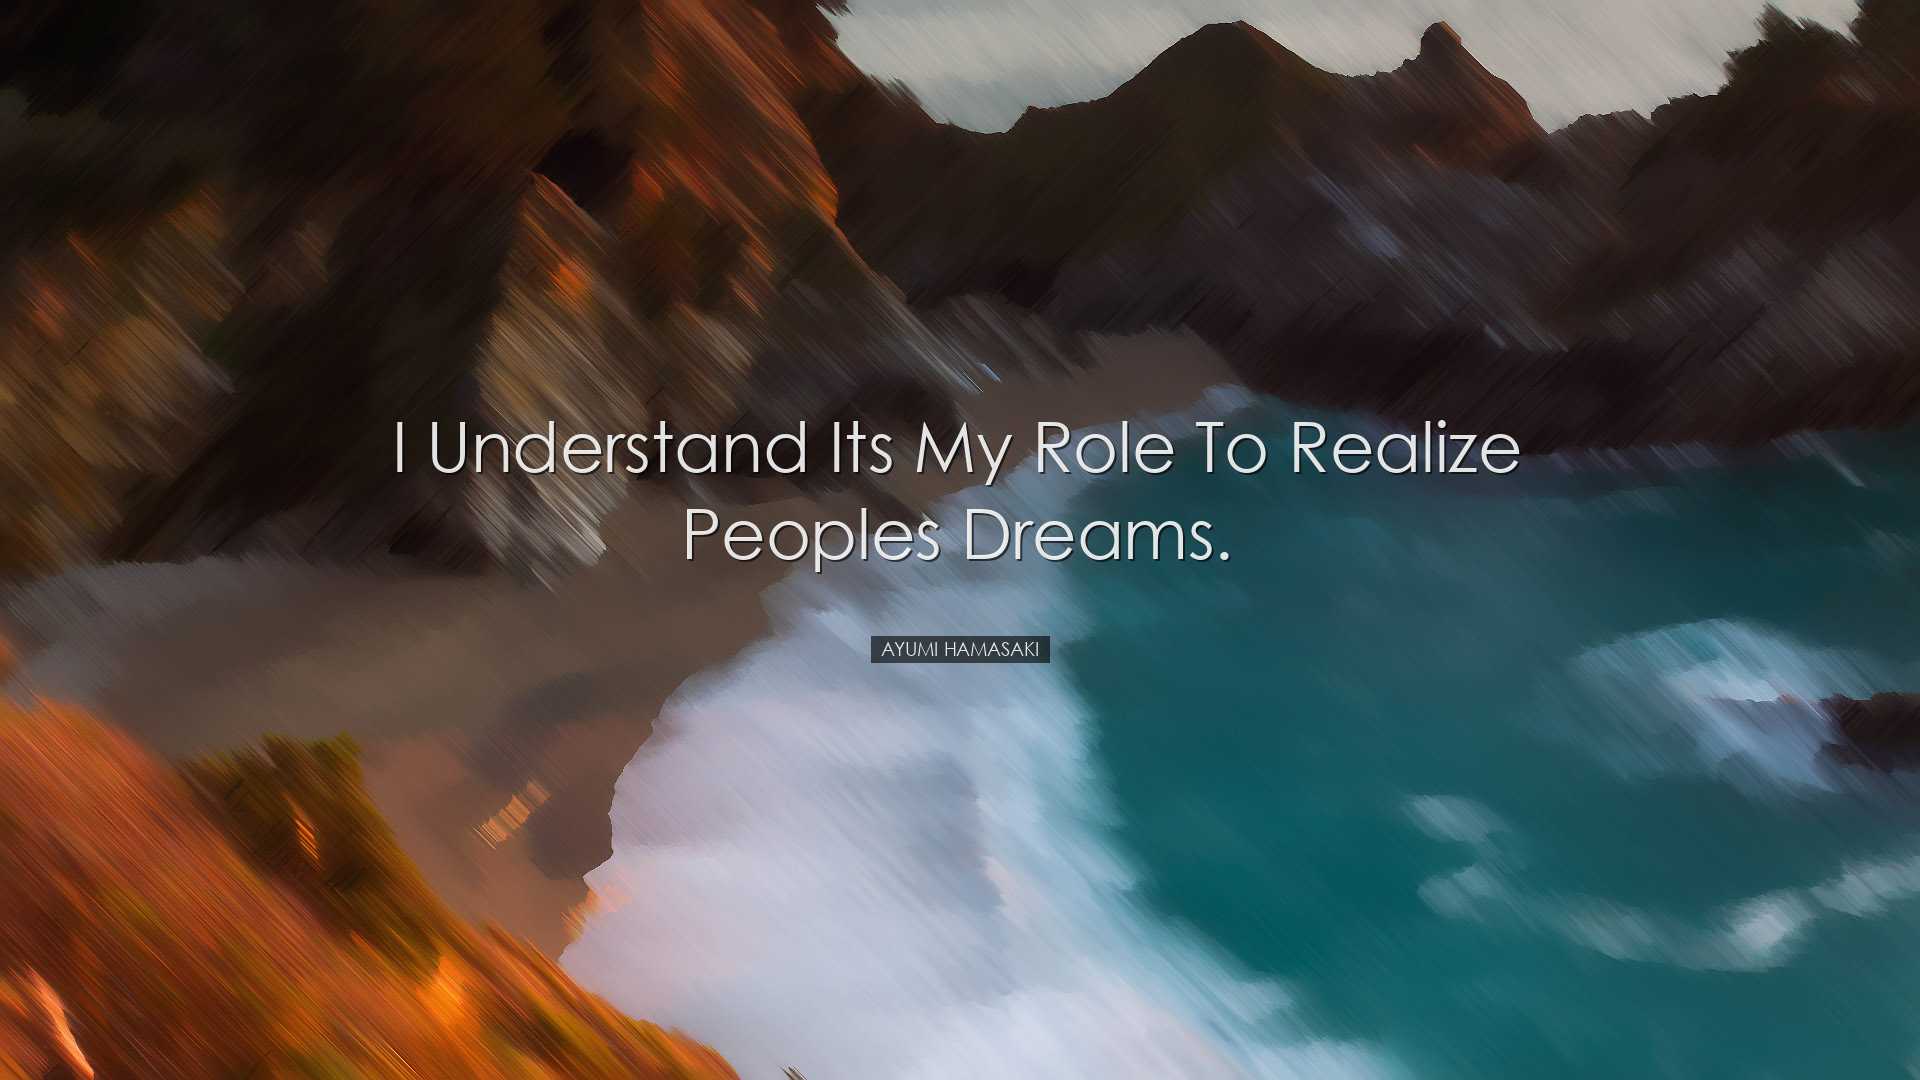 I understand its my role to realize peoples dreams. - Ayumi Hamasa